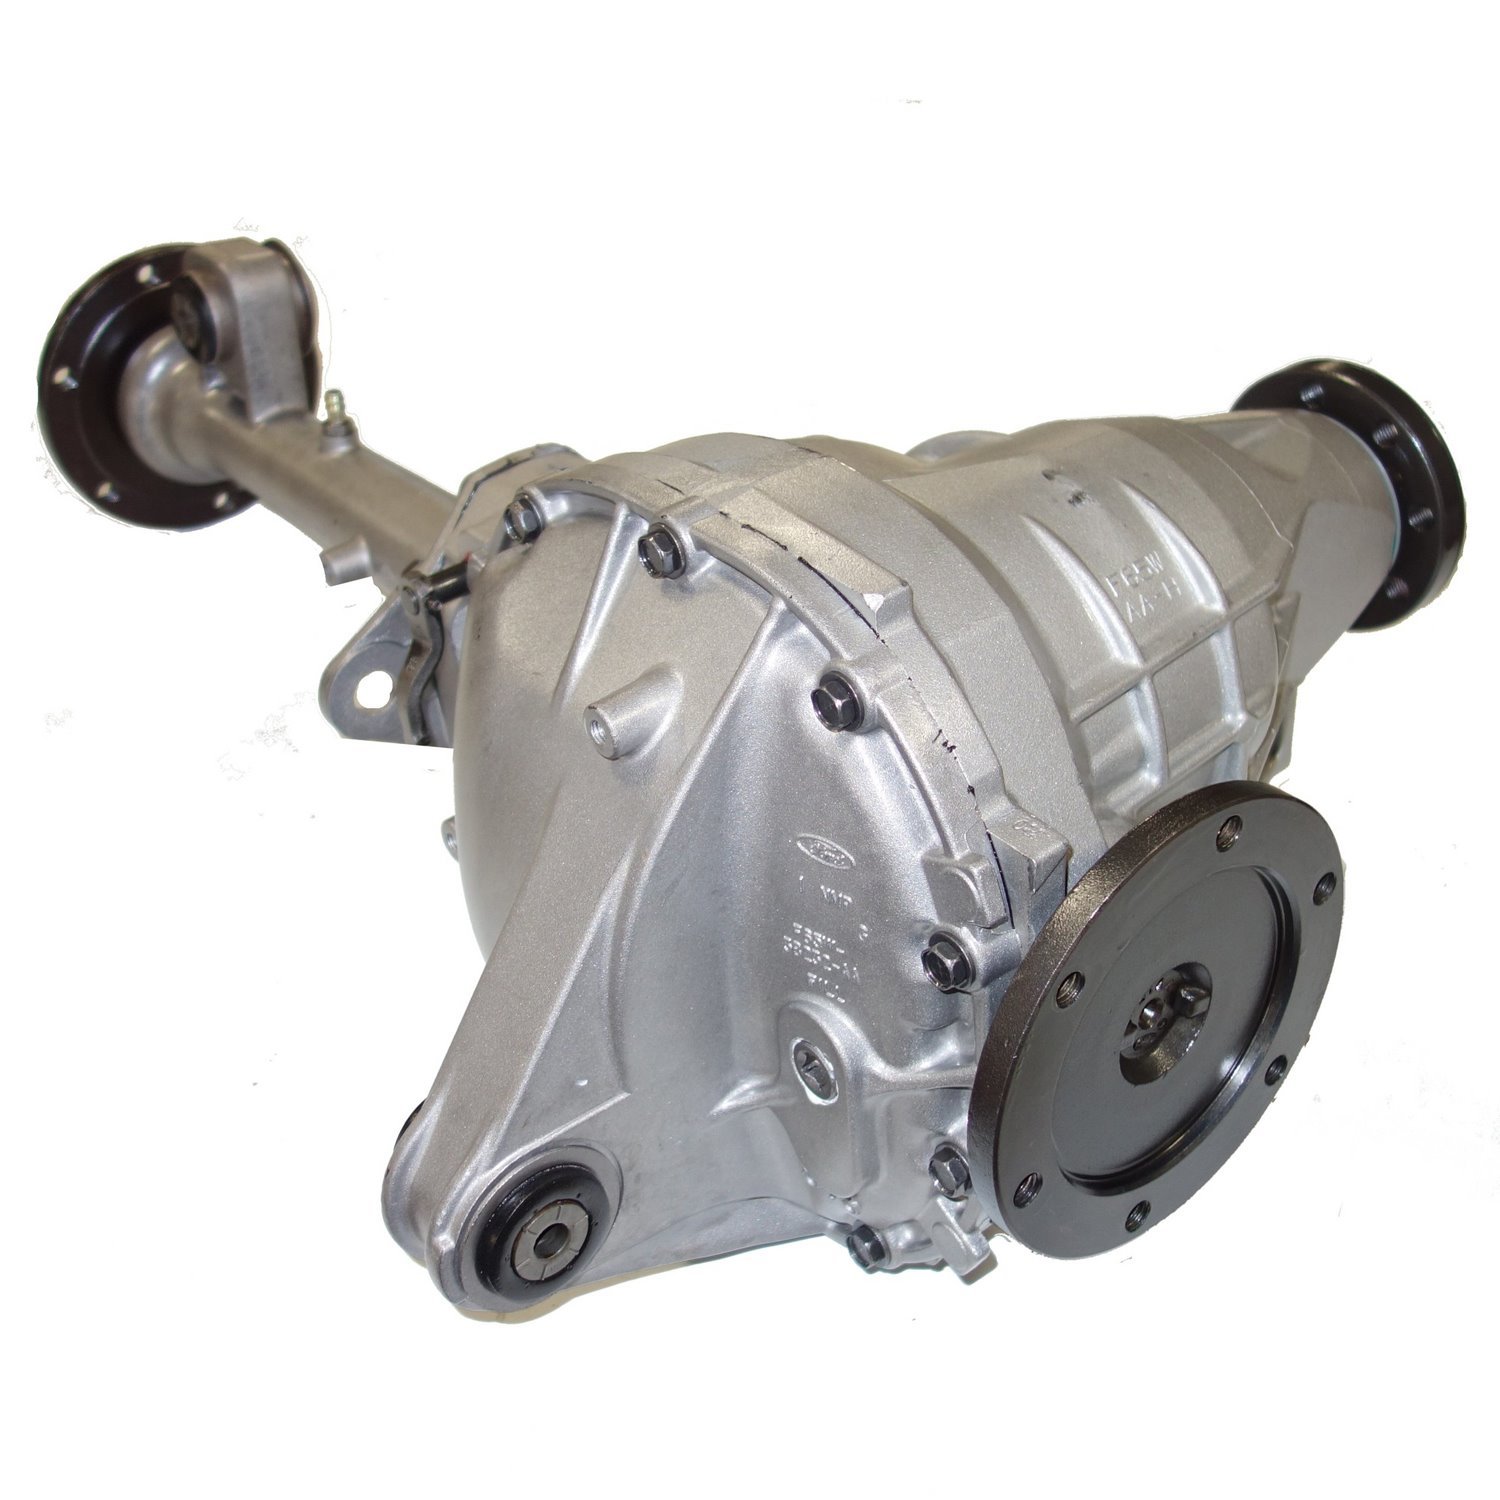 Remanufactured Axle Assembly for 8.8 IFS 97-02 Expedition